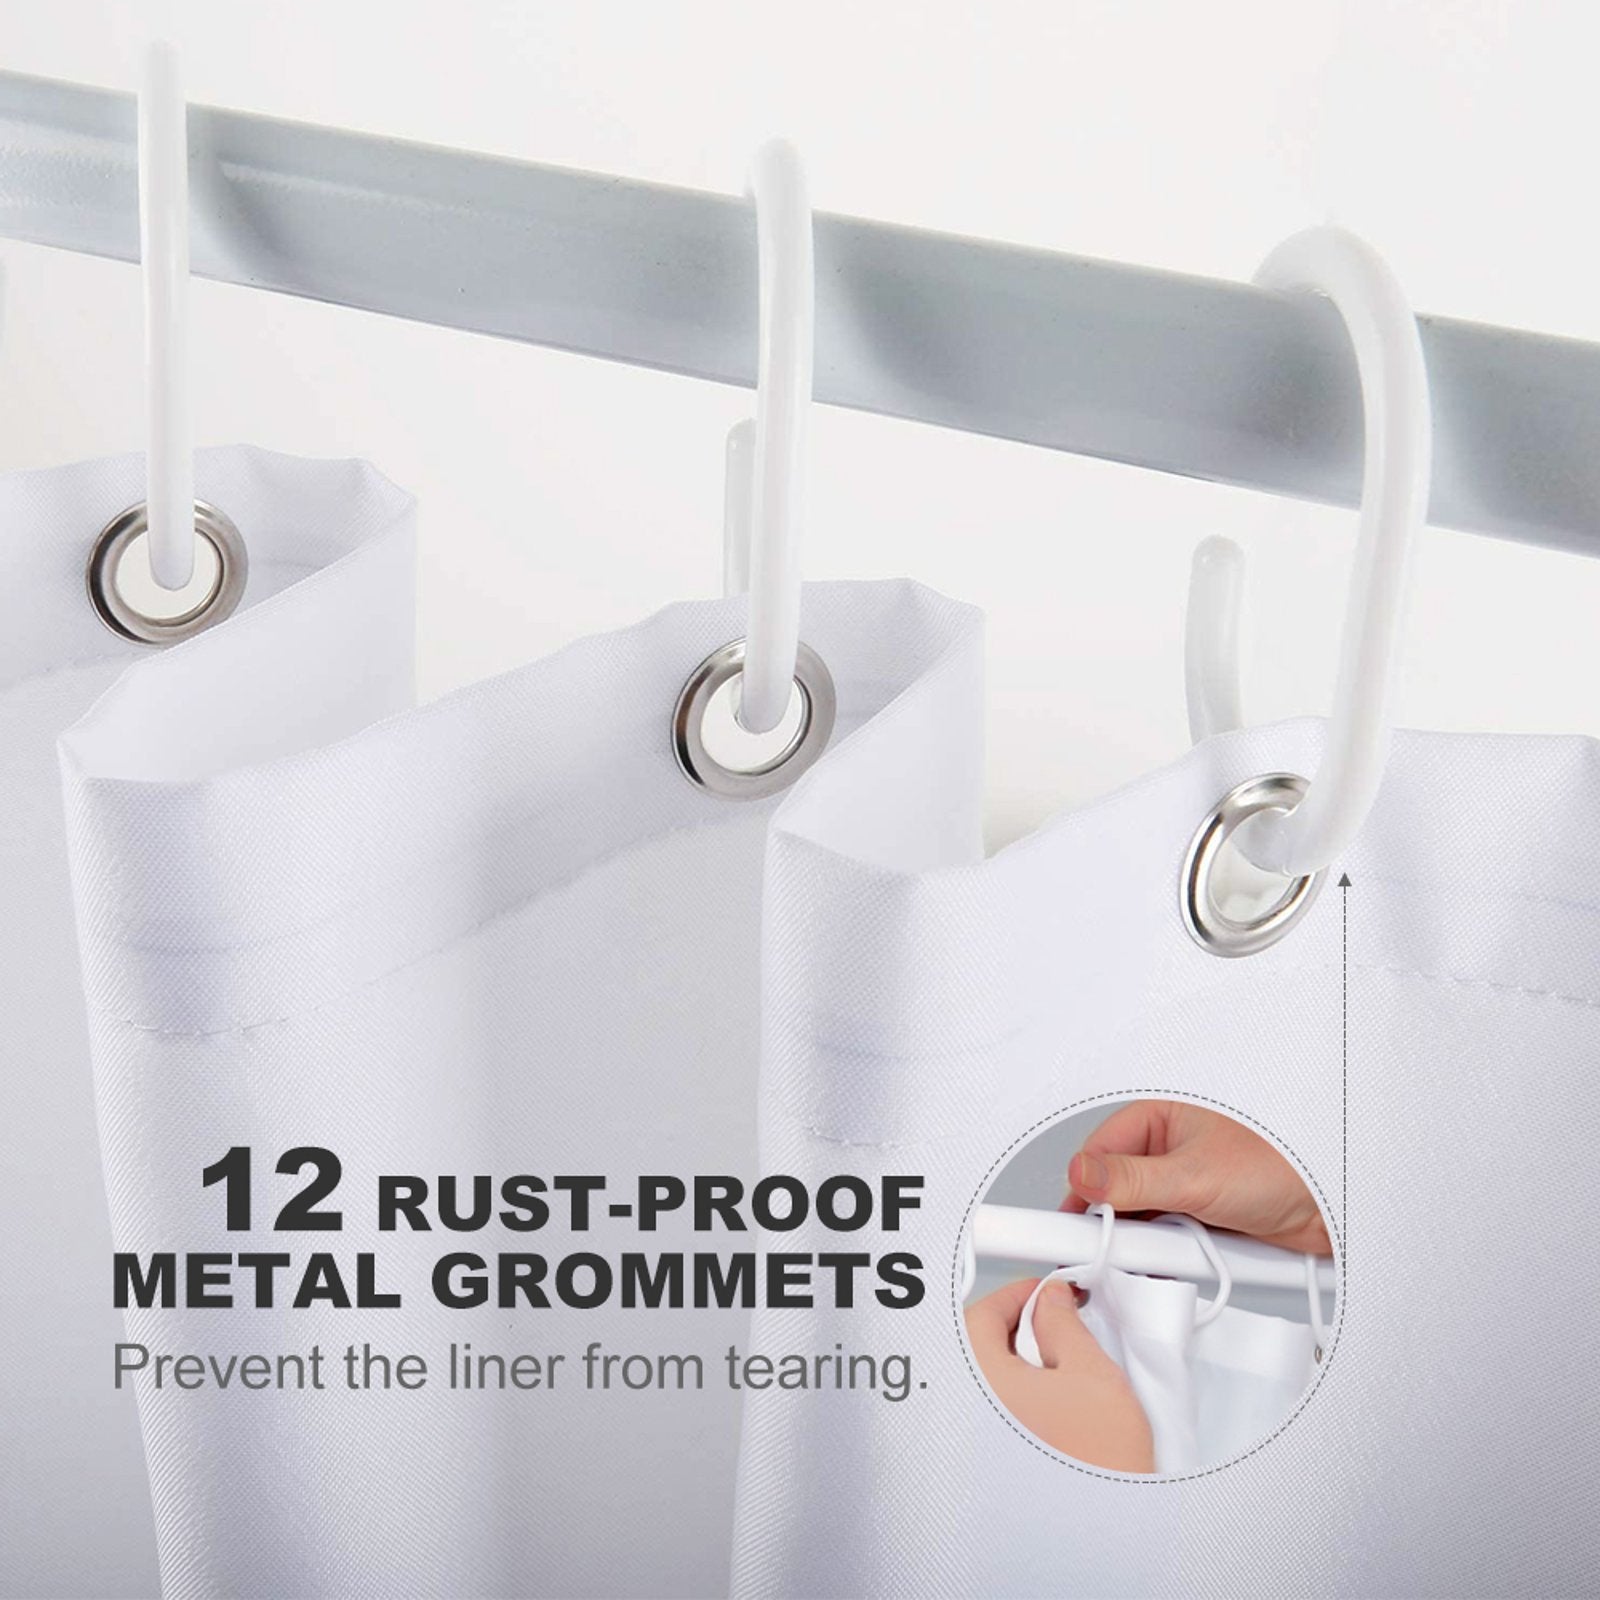 Close-up of white shower curtain with white hooks on a rod. Text reads "12 Rust-Proof Metal Grommets - Prevent the liner from tearing." A small image inset shows a hand holding the Funny Cowboy Cool Meowdy Partner Cat Shower Curtain-Cottoncat featuring a whimsical cowboy cat design.